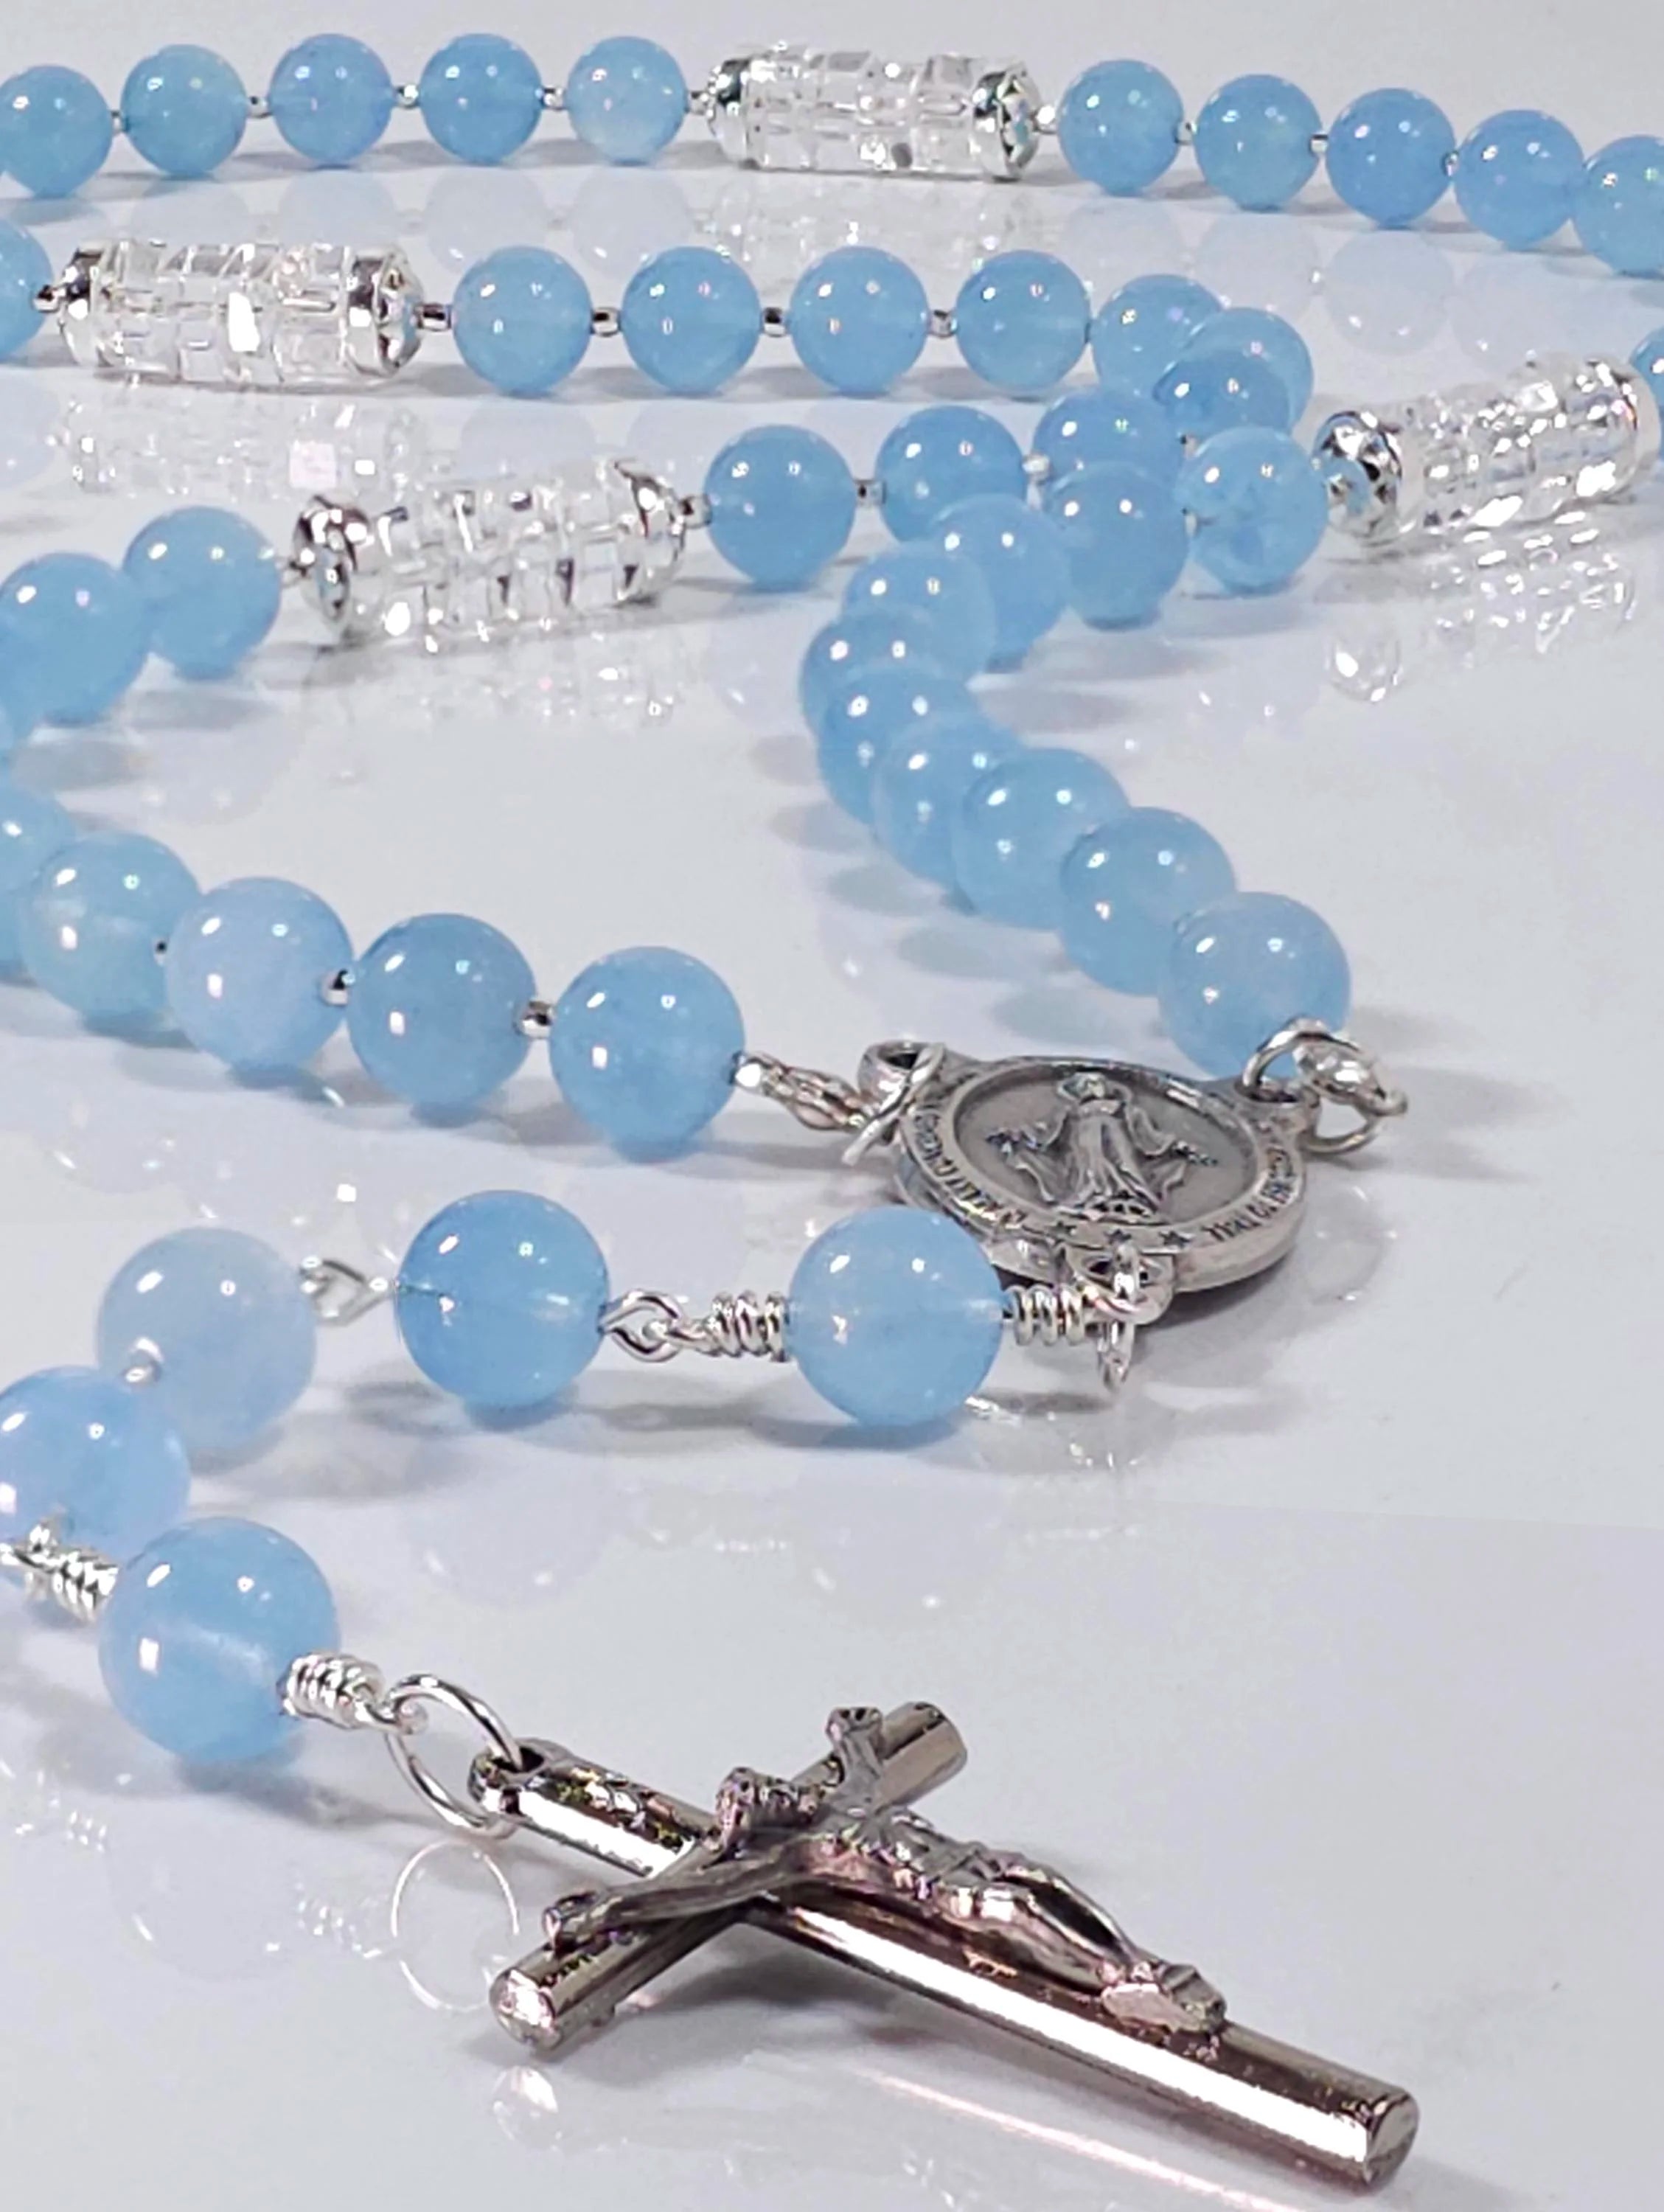 Heirloom quality blue catholic rosary adorned with sterling silver findings laying on white surface.